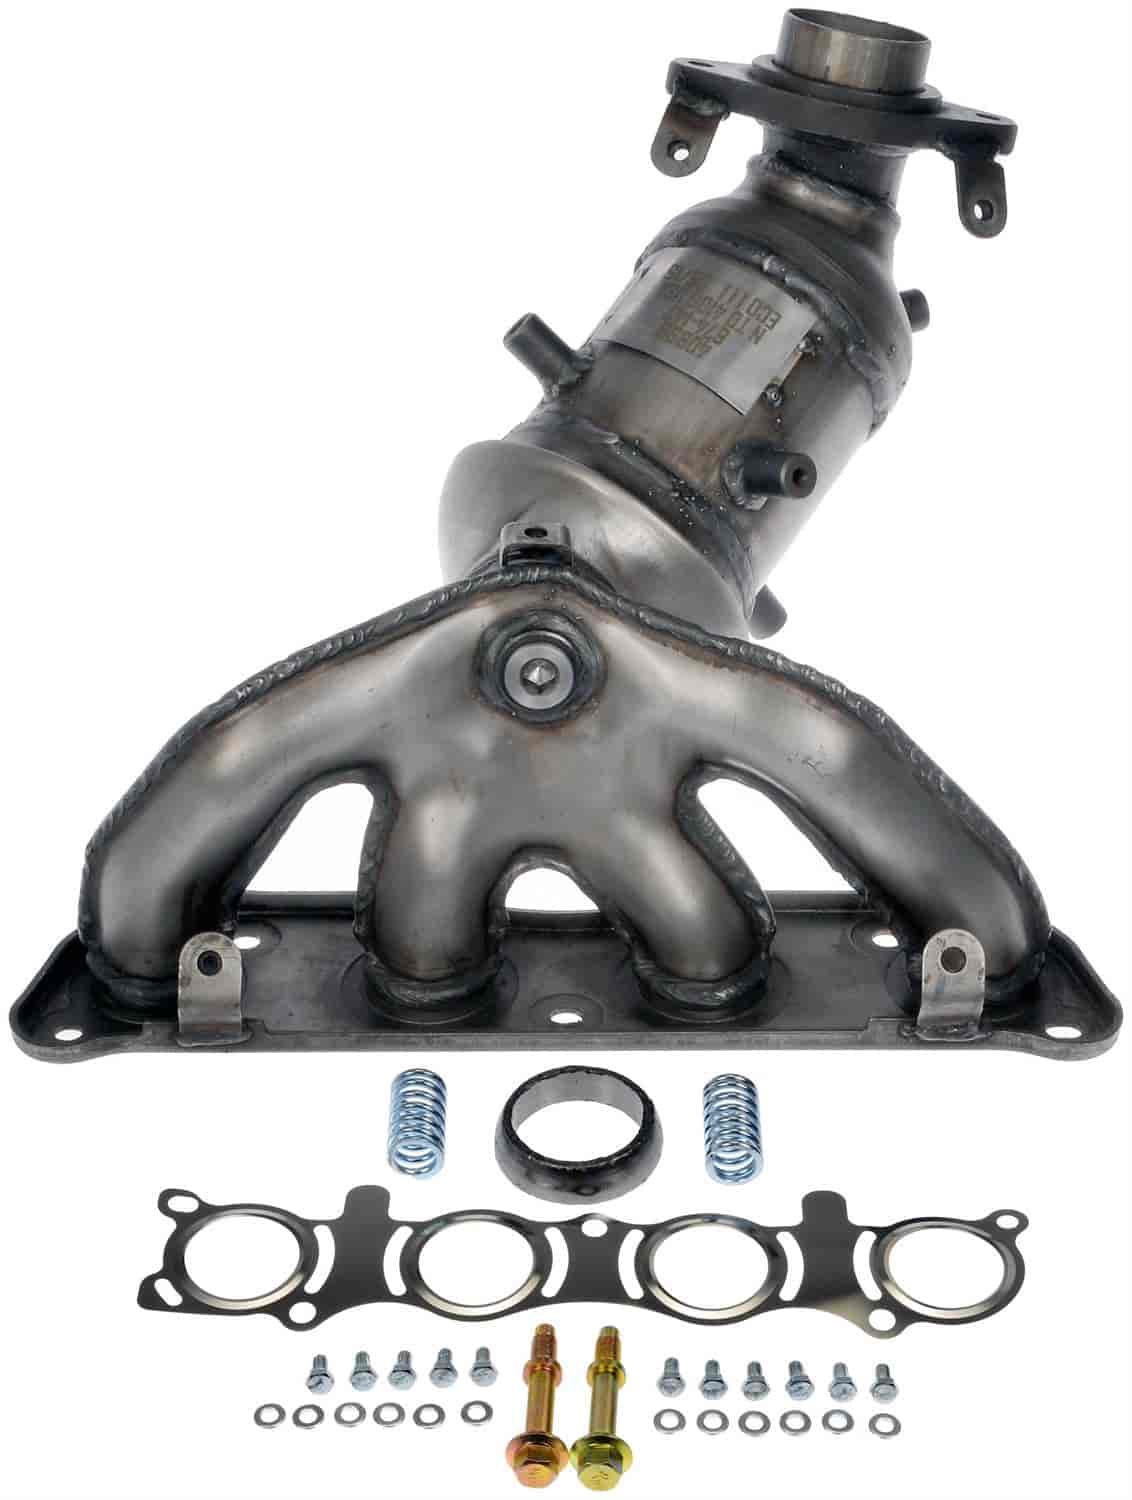 Manifold Converter - Not Carb Compliant - Not Legal NY-CA